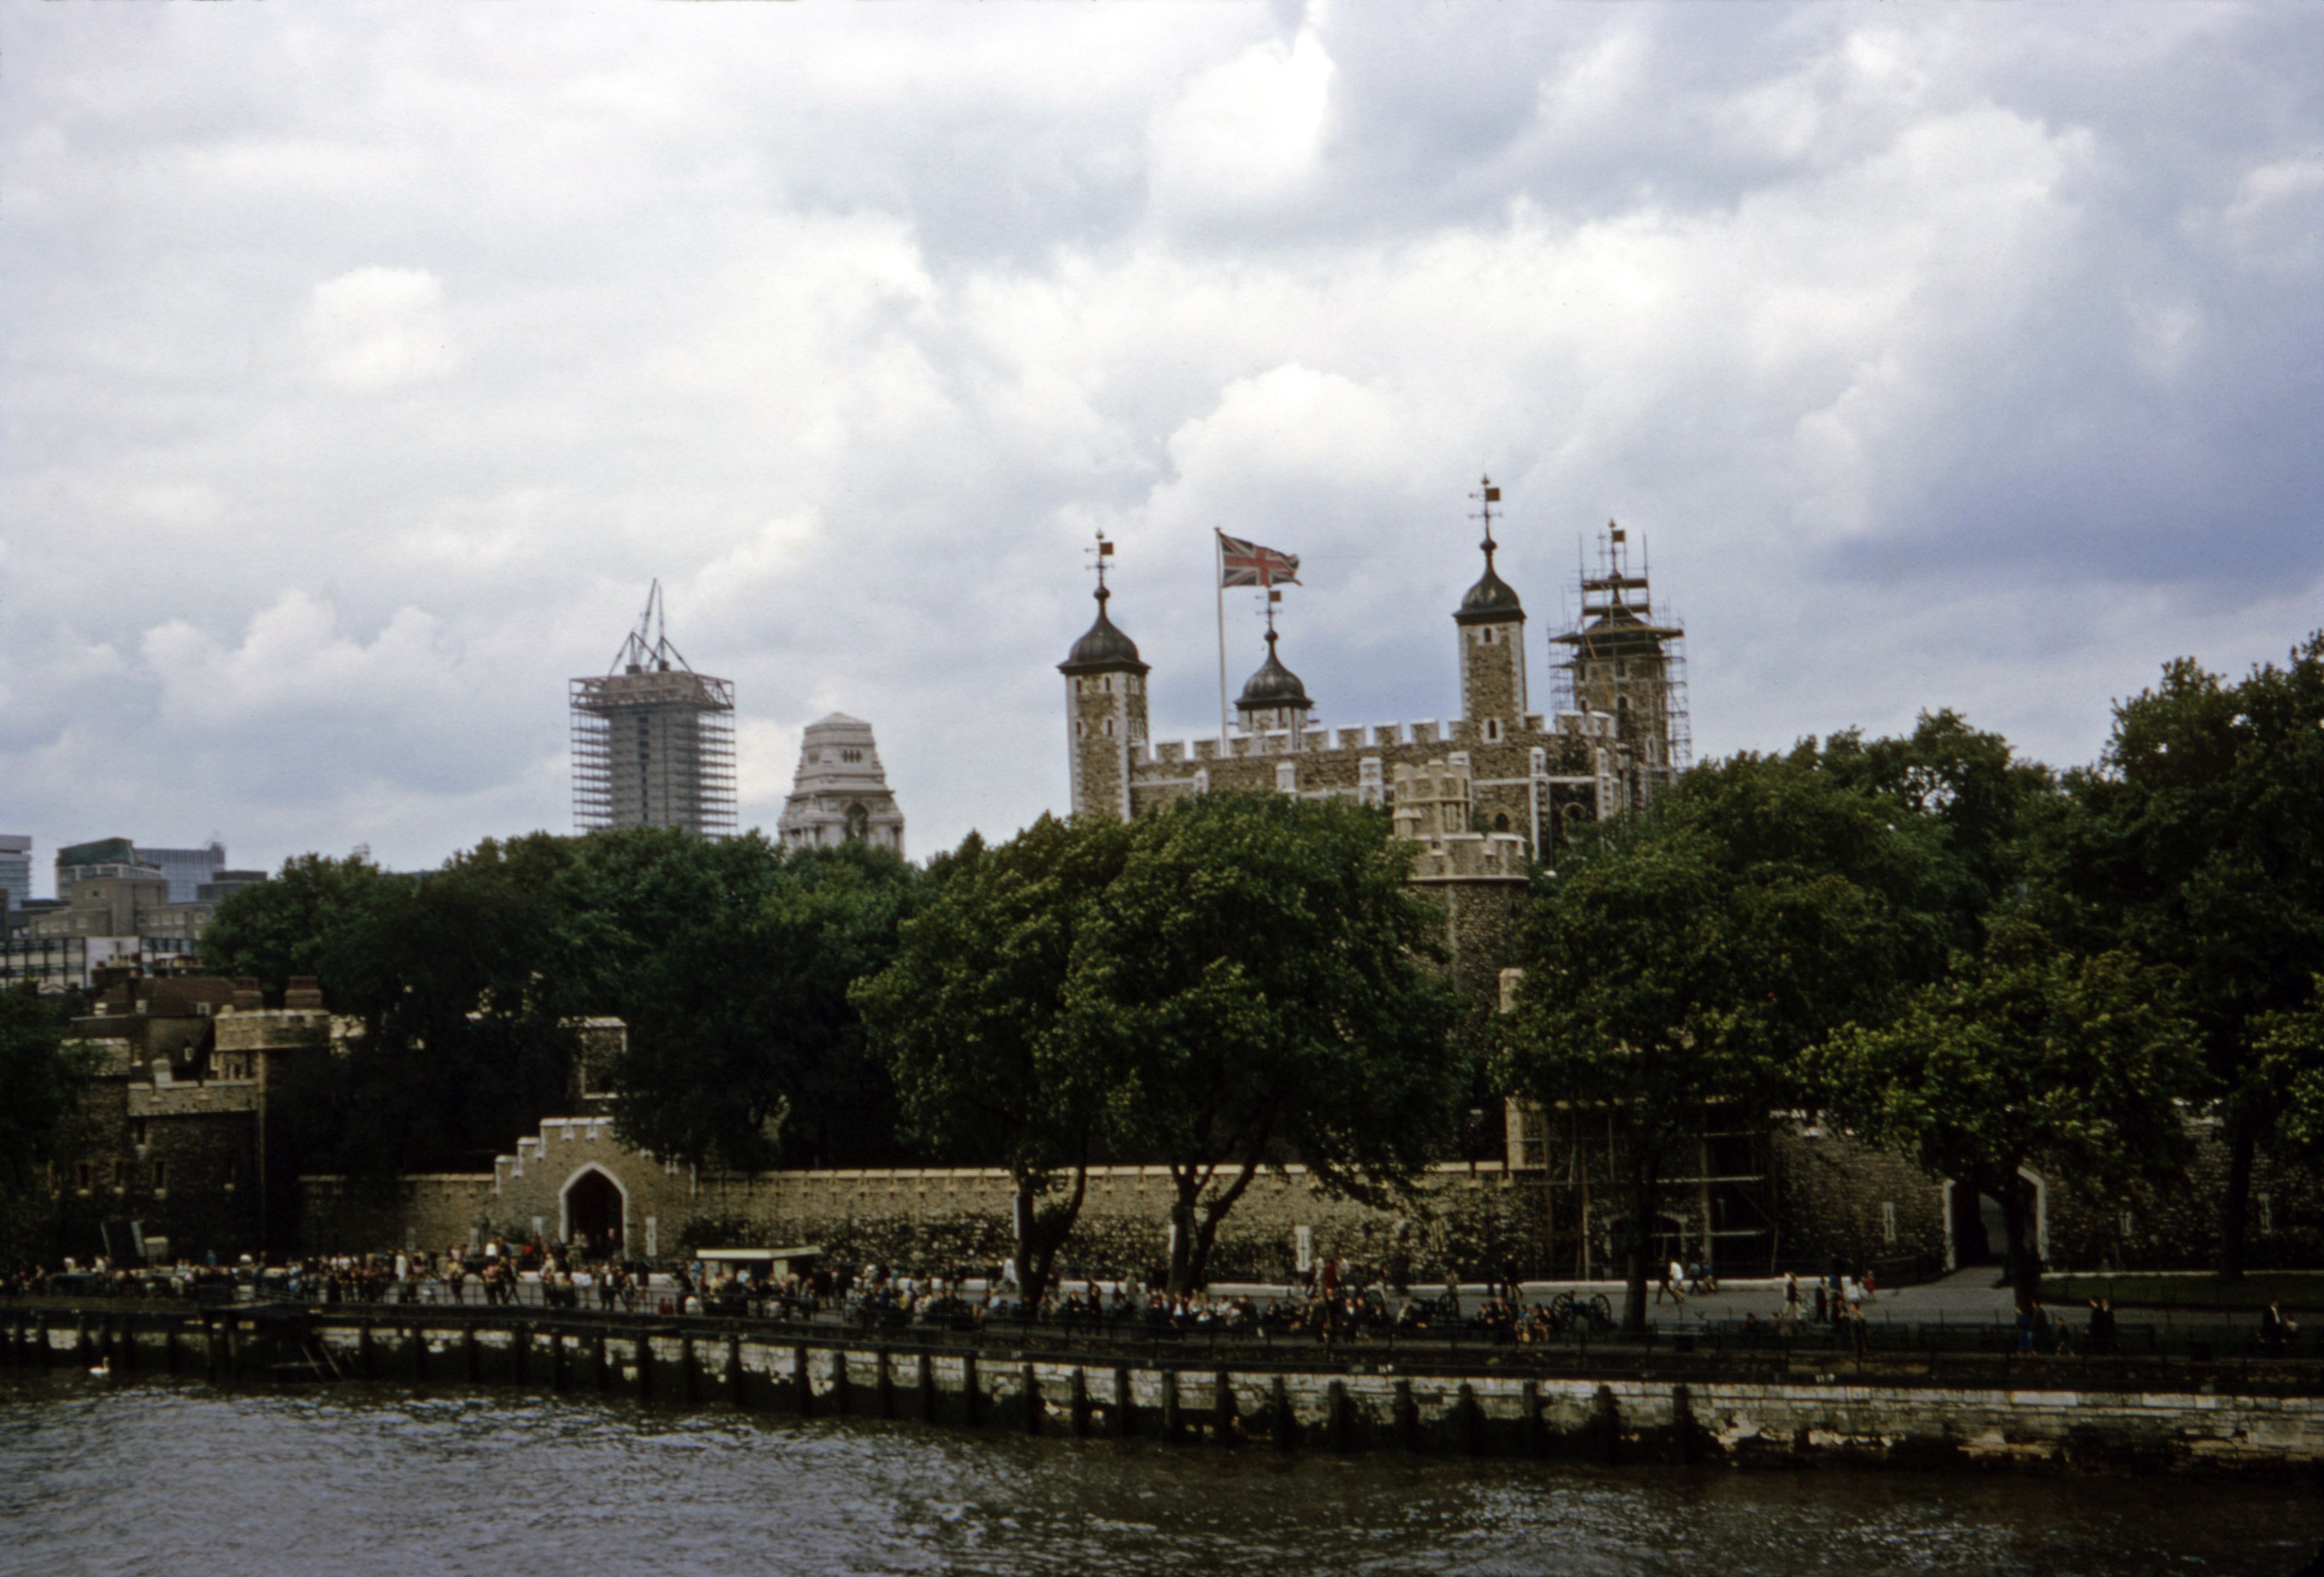 Summer 1967 The Tower of London